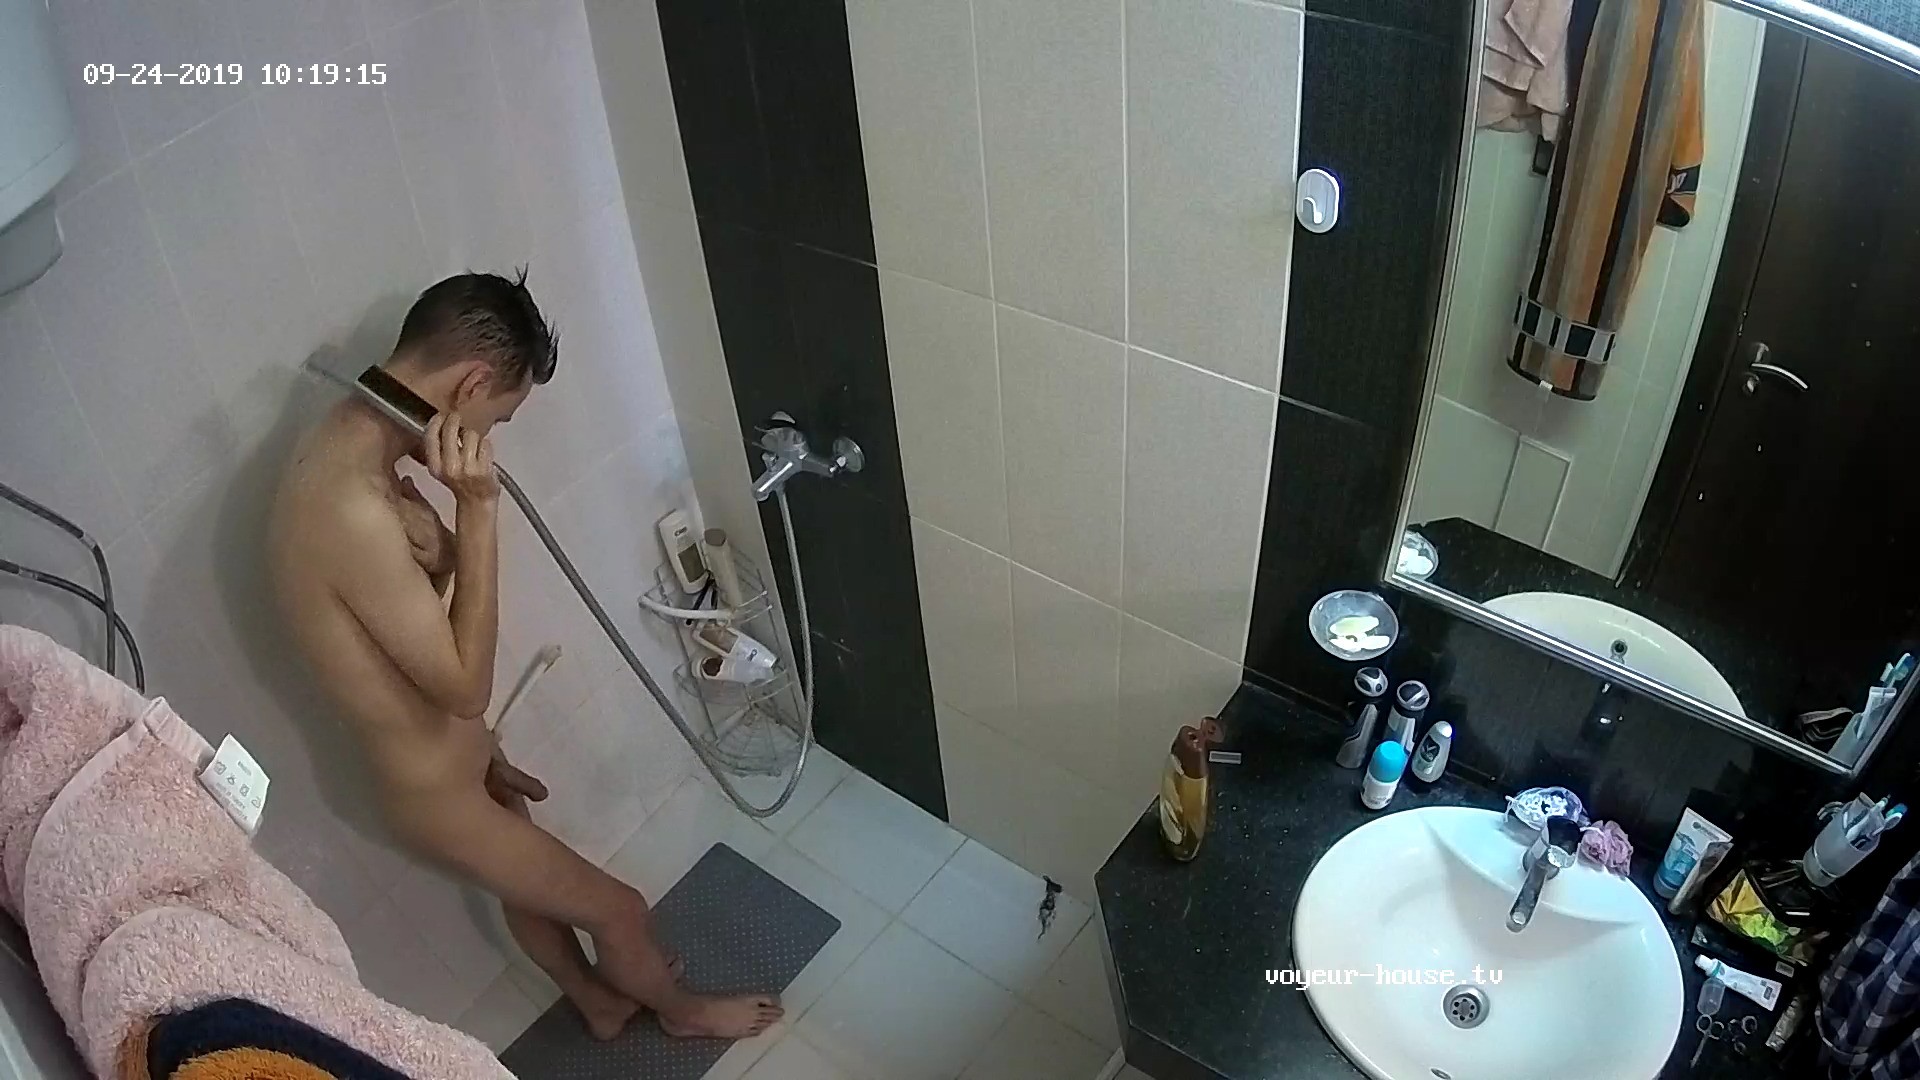 Guest Guy Shower 24 Sep 2019